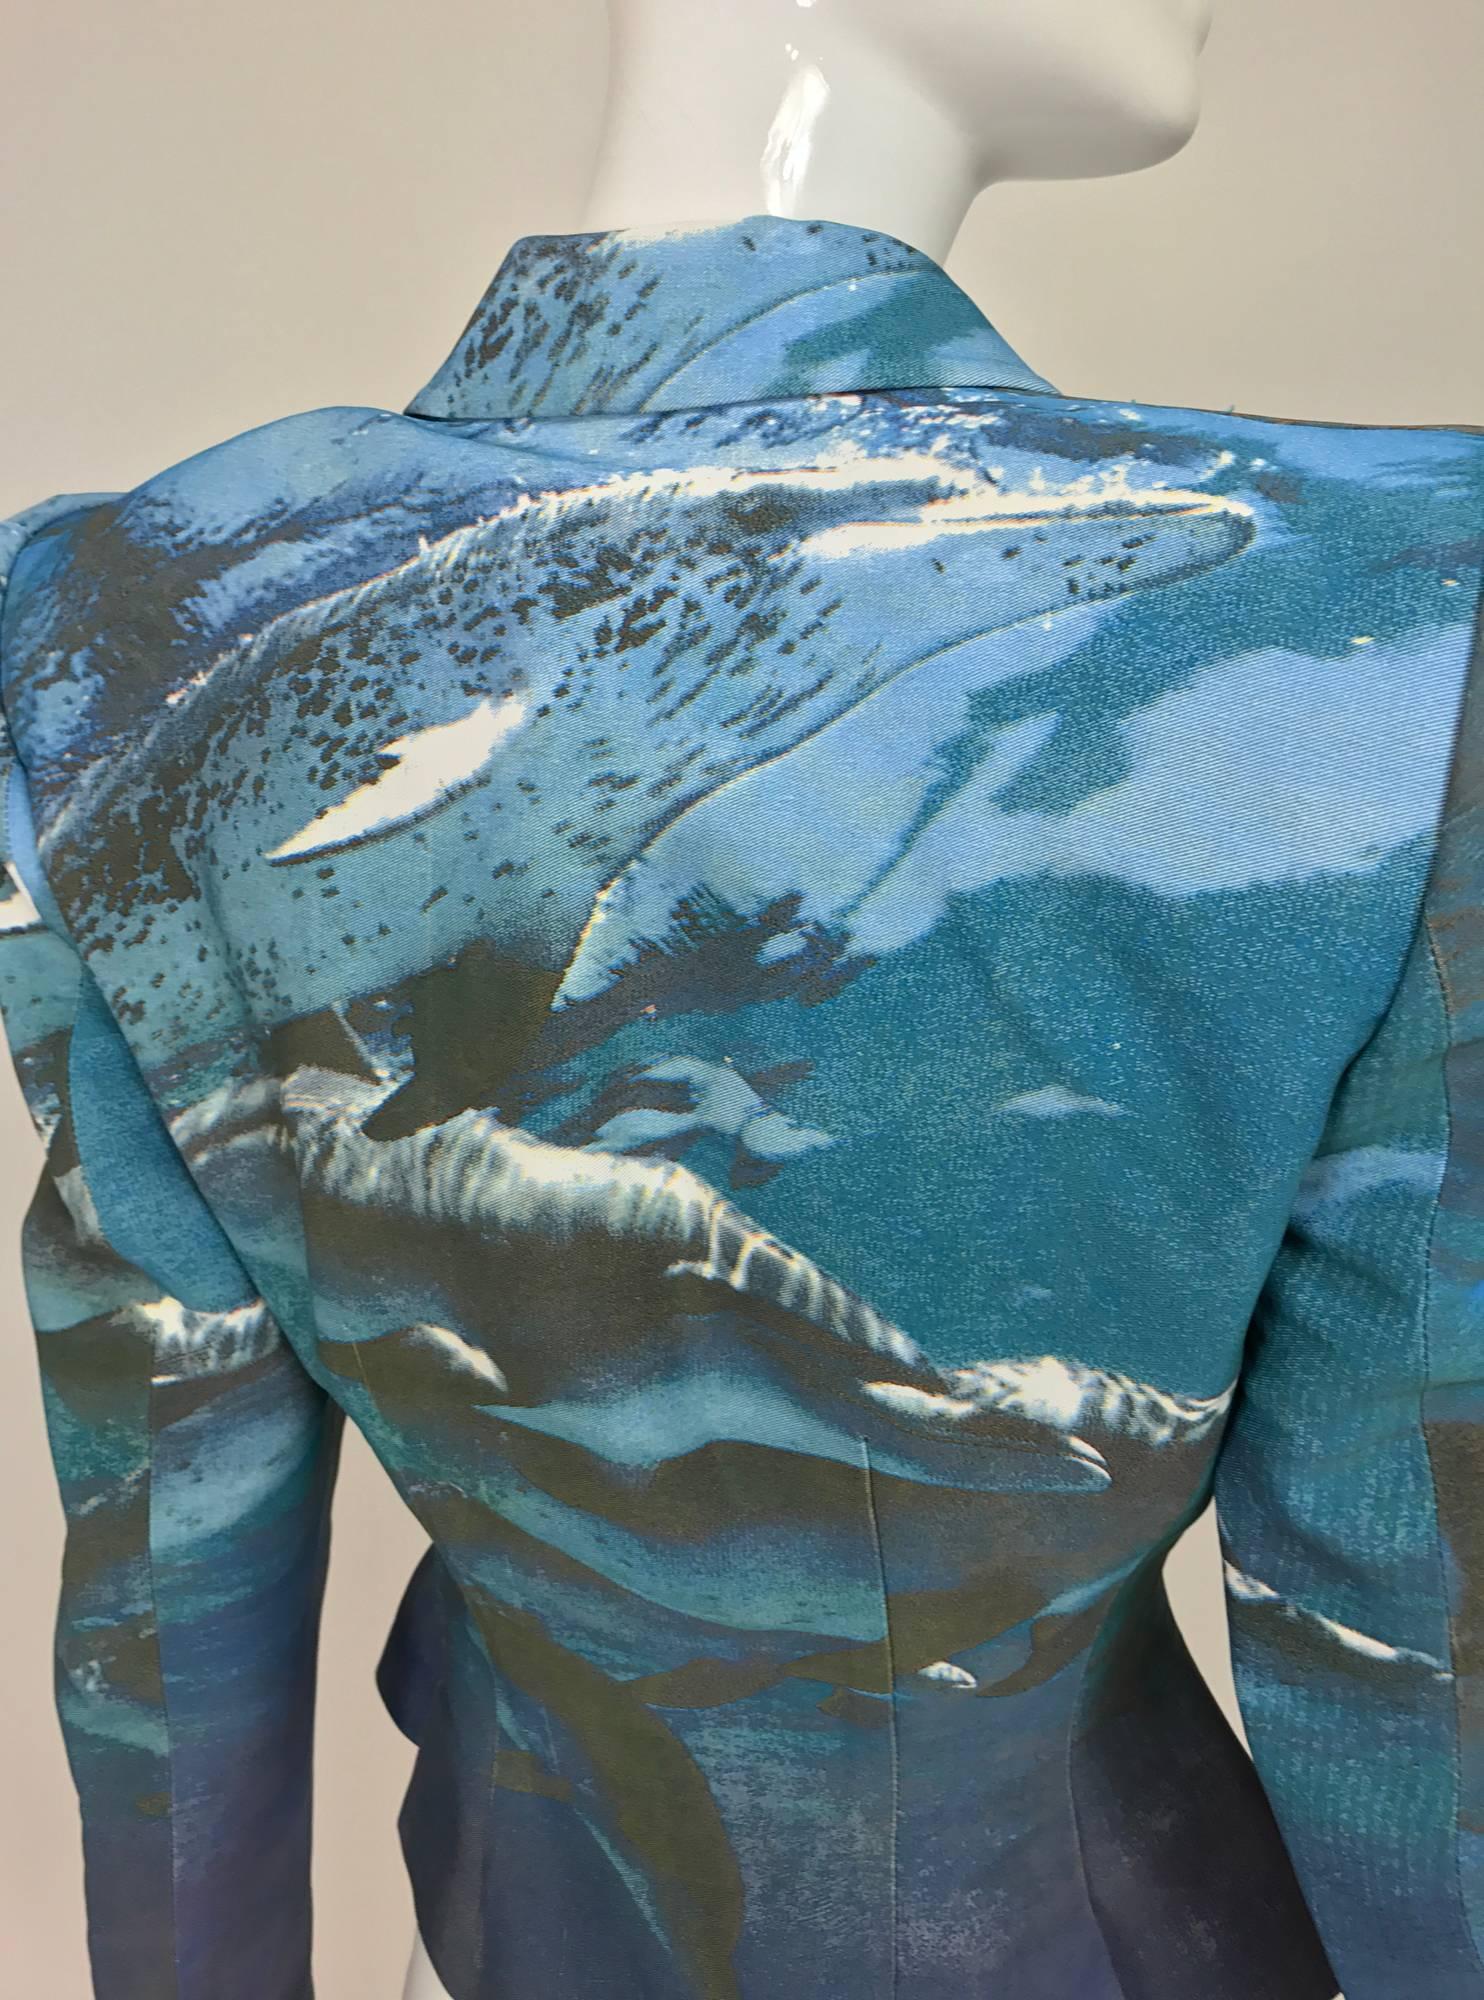 Alexander McQueen digital print underwater dolphin cropped jacket...Peaked shoulder cropped jacket, with nipped waist, double breasted, flared hem, long tapered sleeves with 4 button cuffs...Marked size 40

In excellent wearable condition... All our